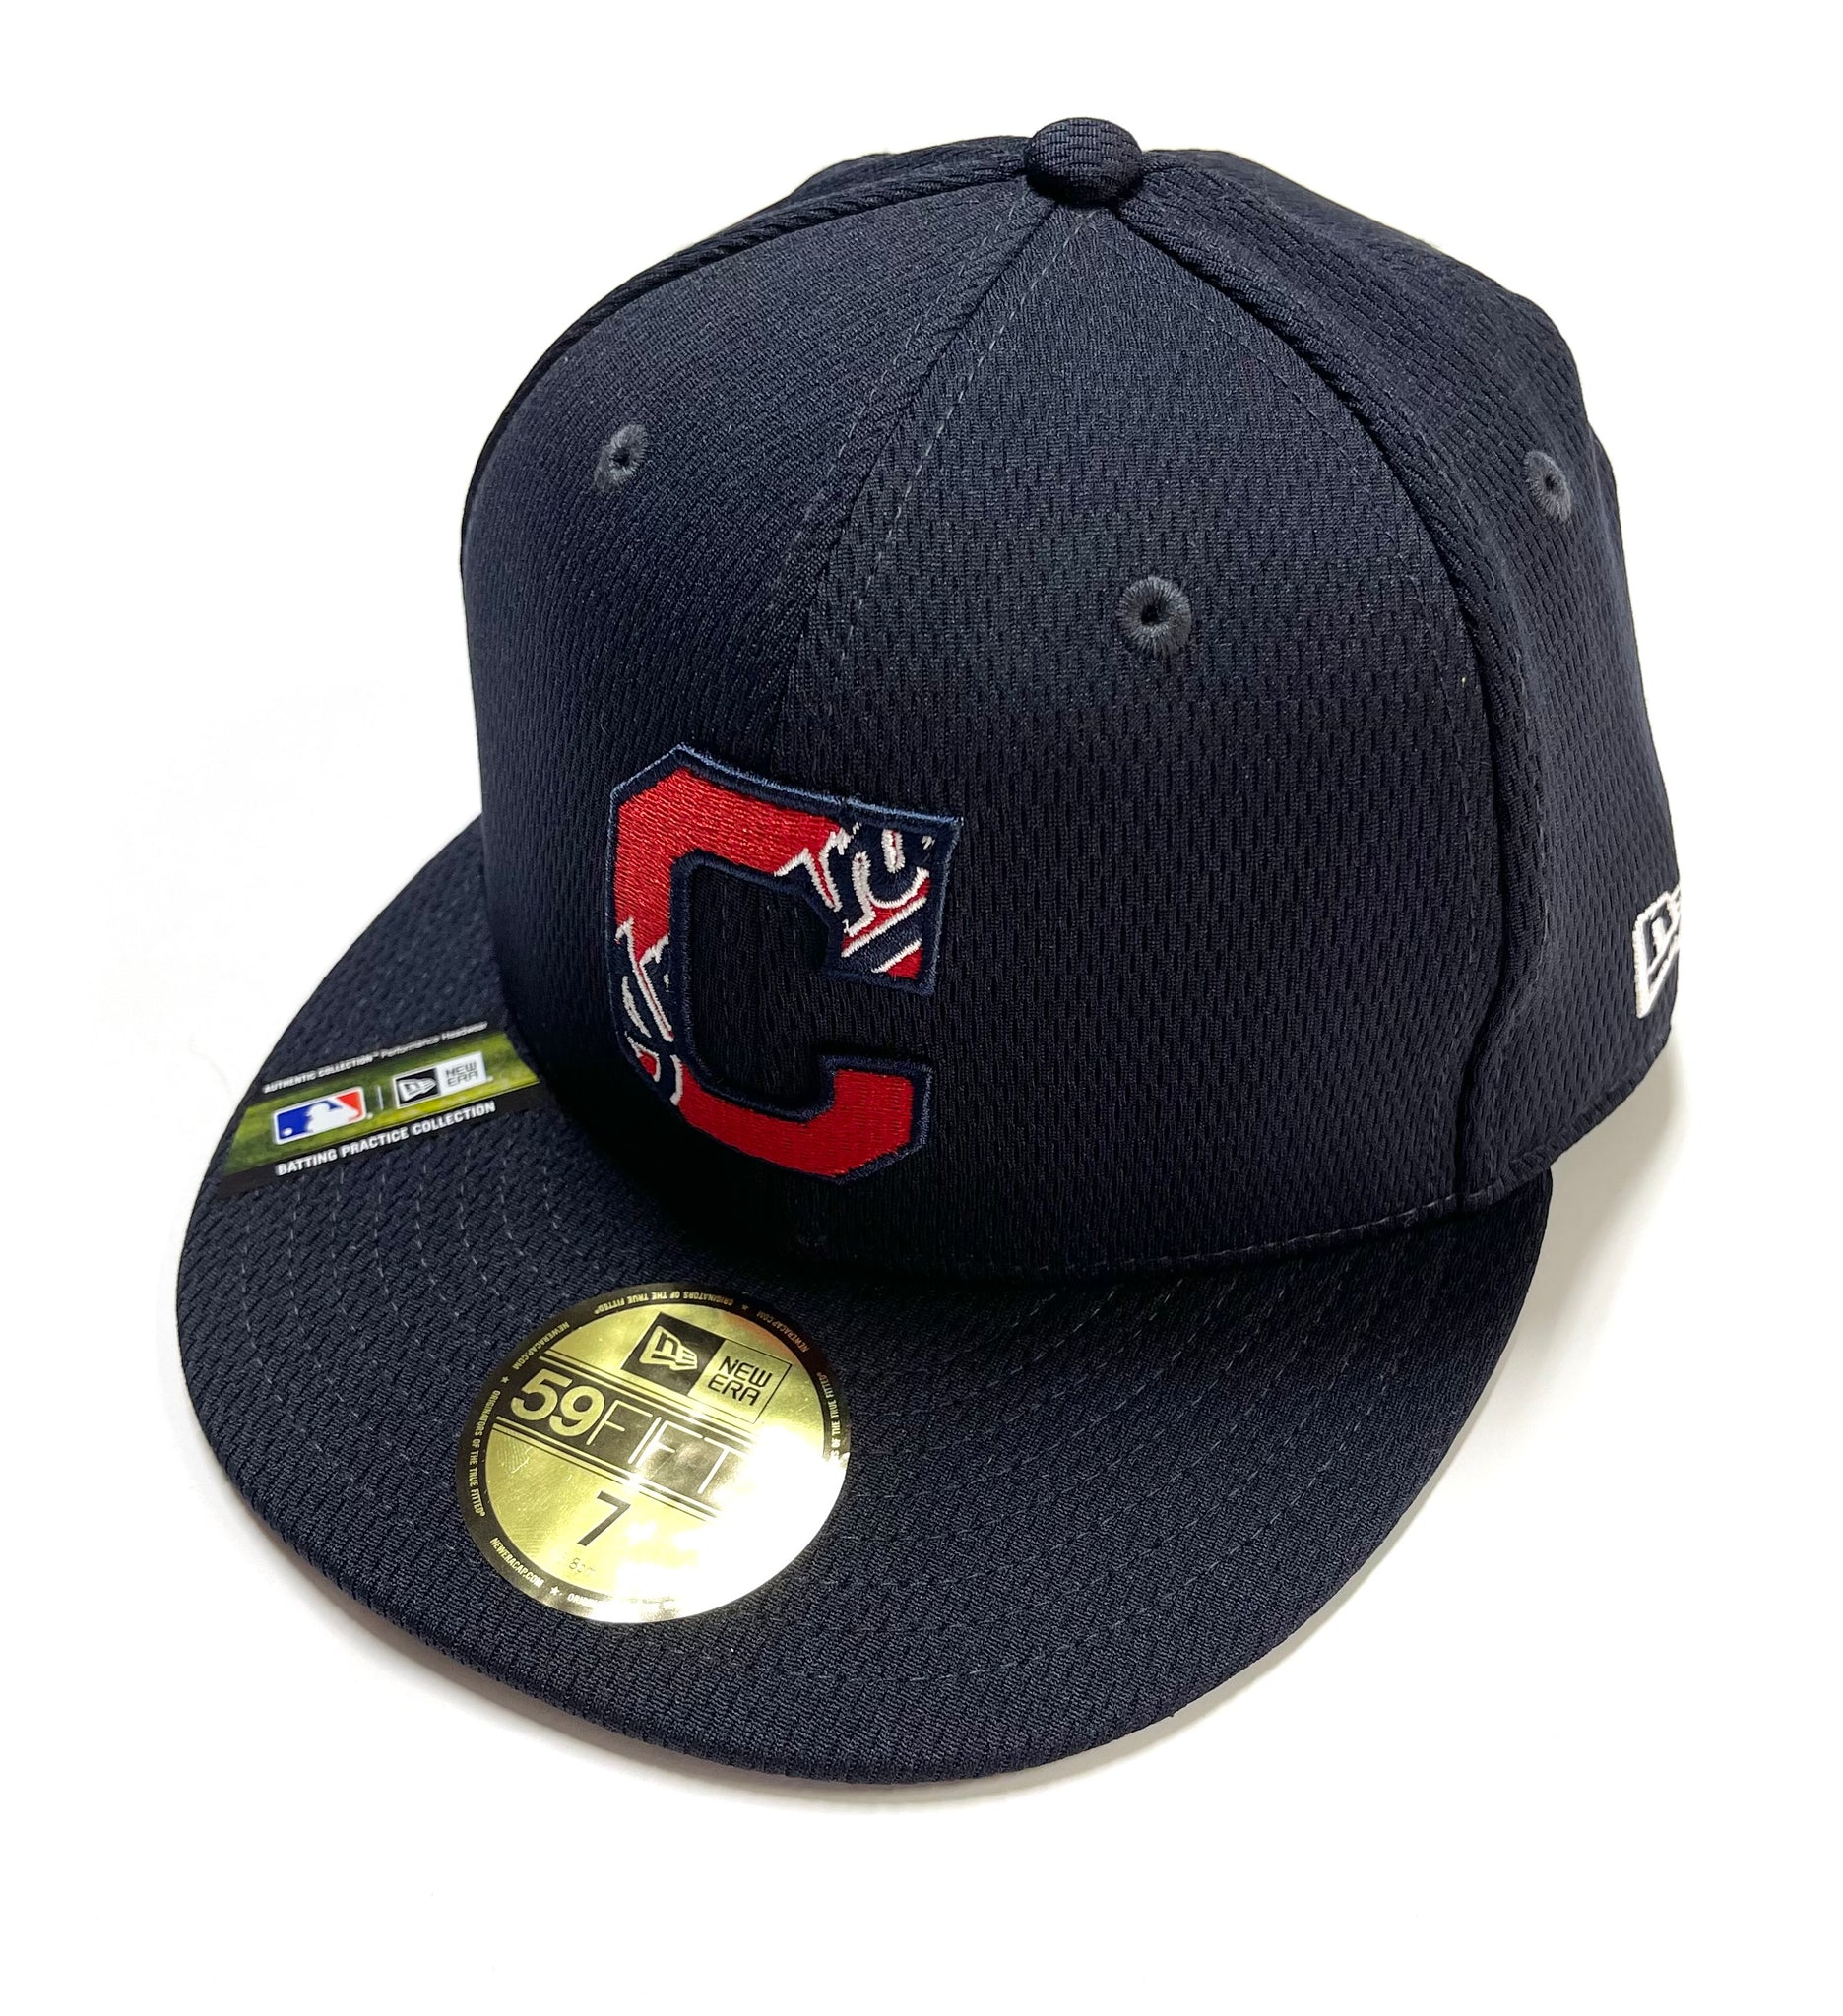 New Era 59Fifty CLEVELAND INDIANS Black Fitted Ball Cap Hat Sz